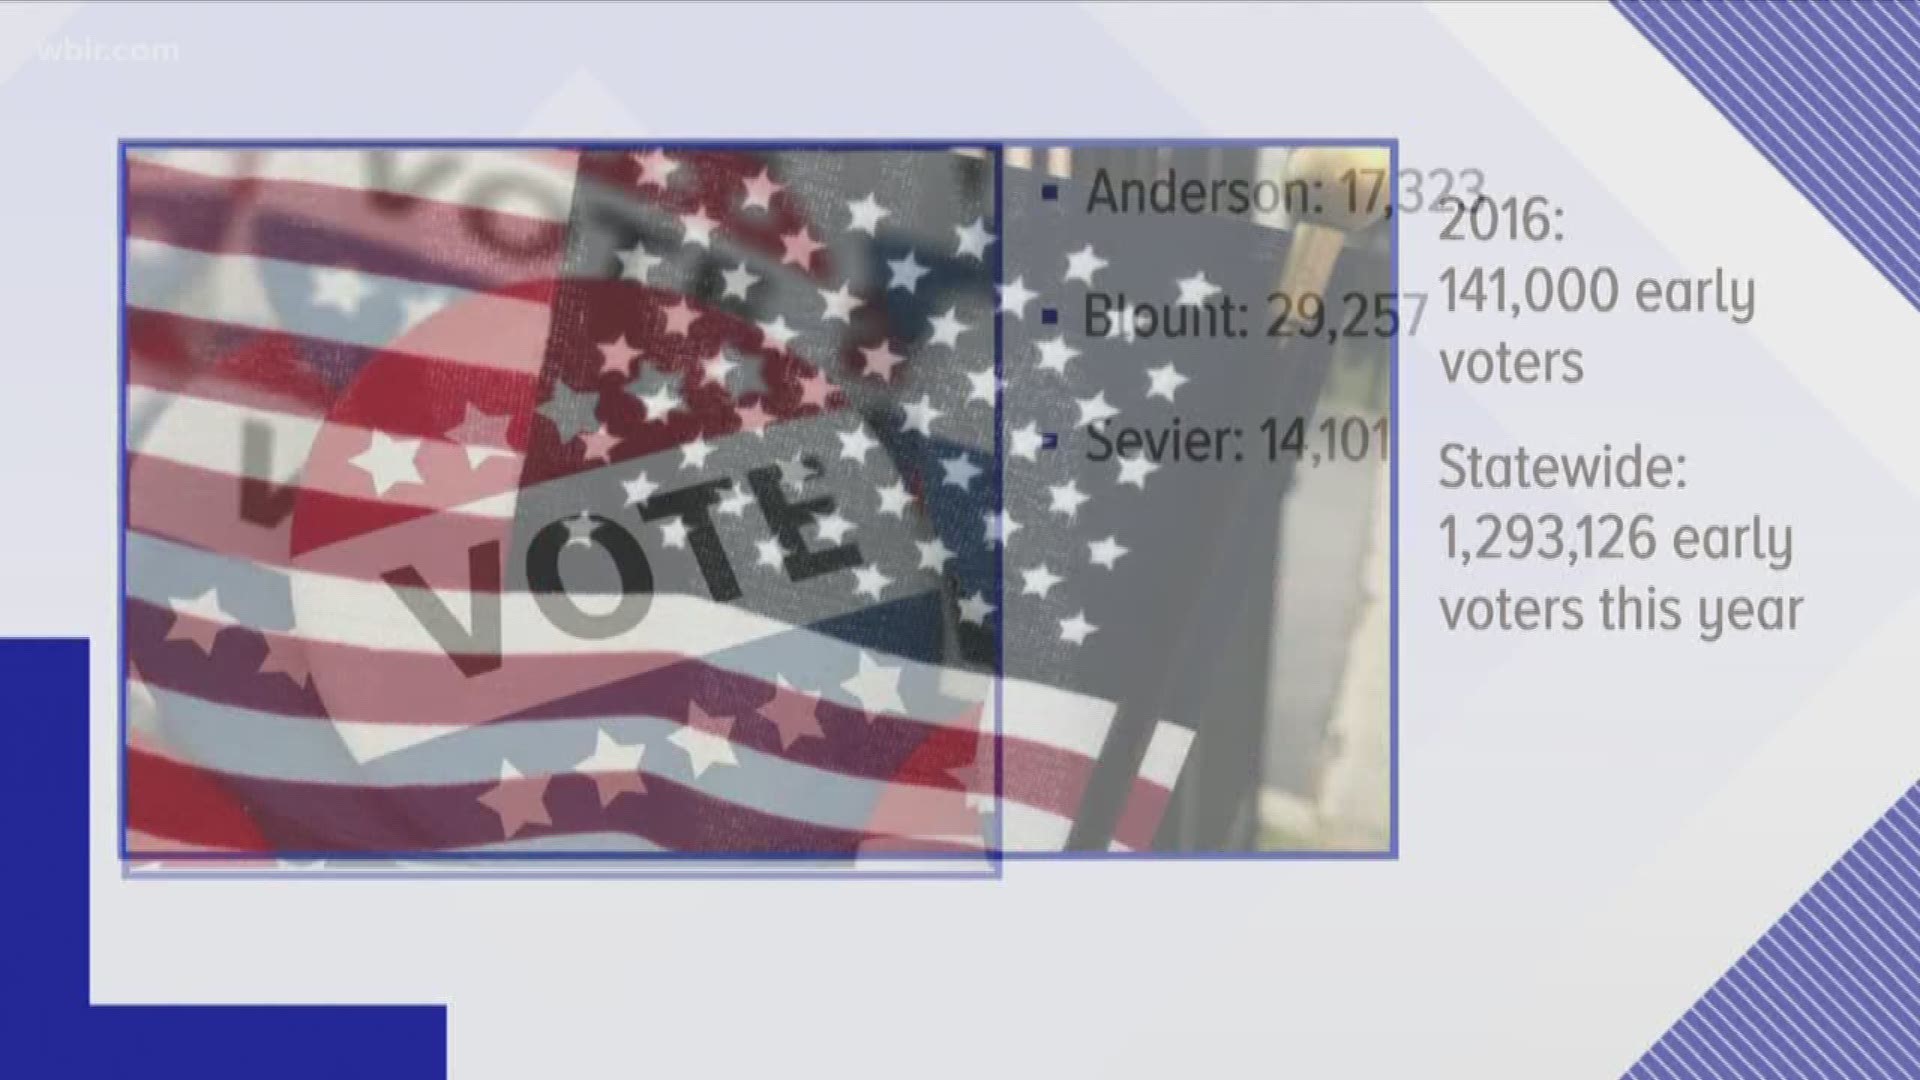 A historic amount of people -- more than 113,000 -- voted early in Knox County.